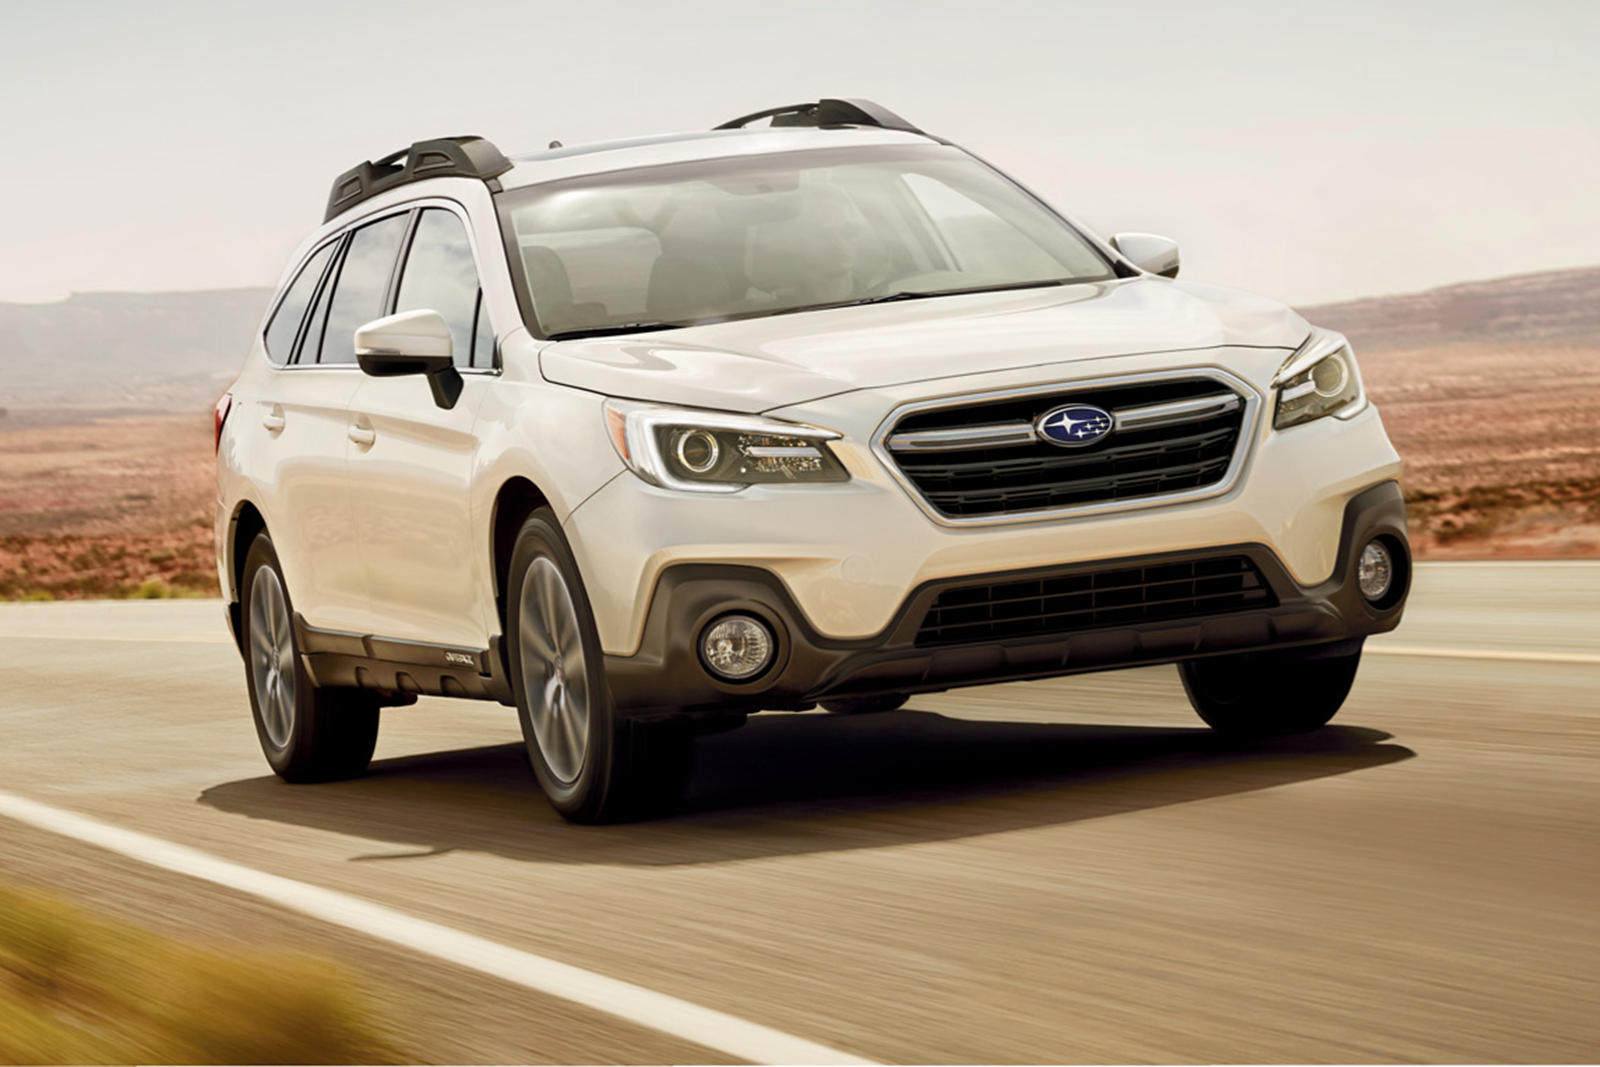 2019 Subaru Outback Front View Driving